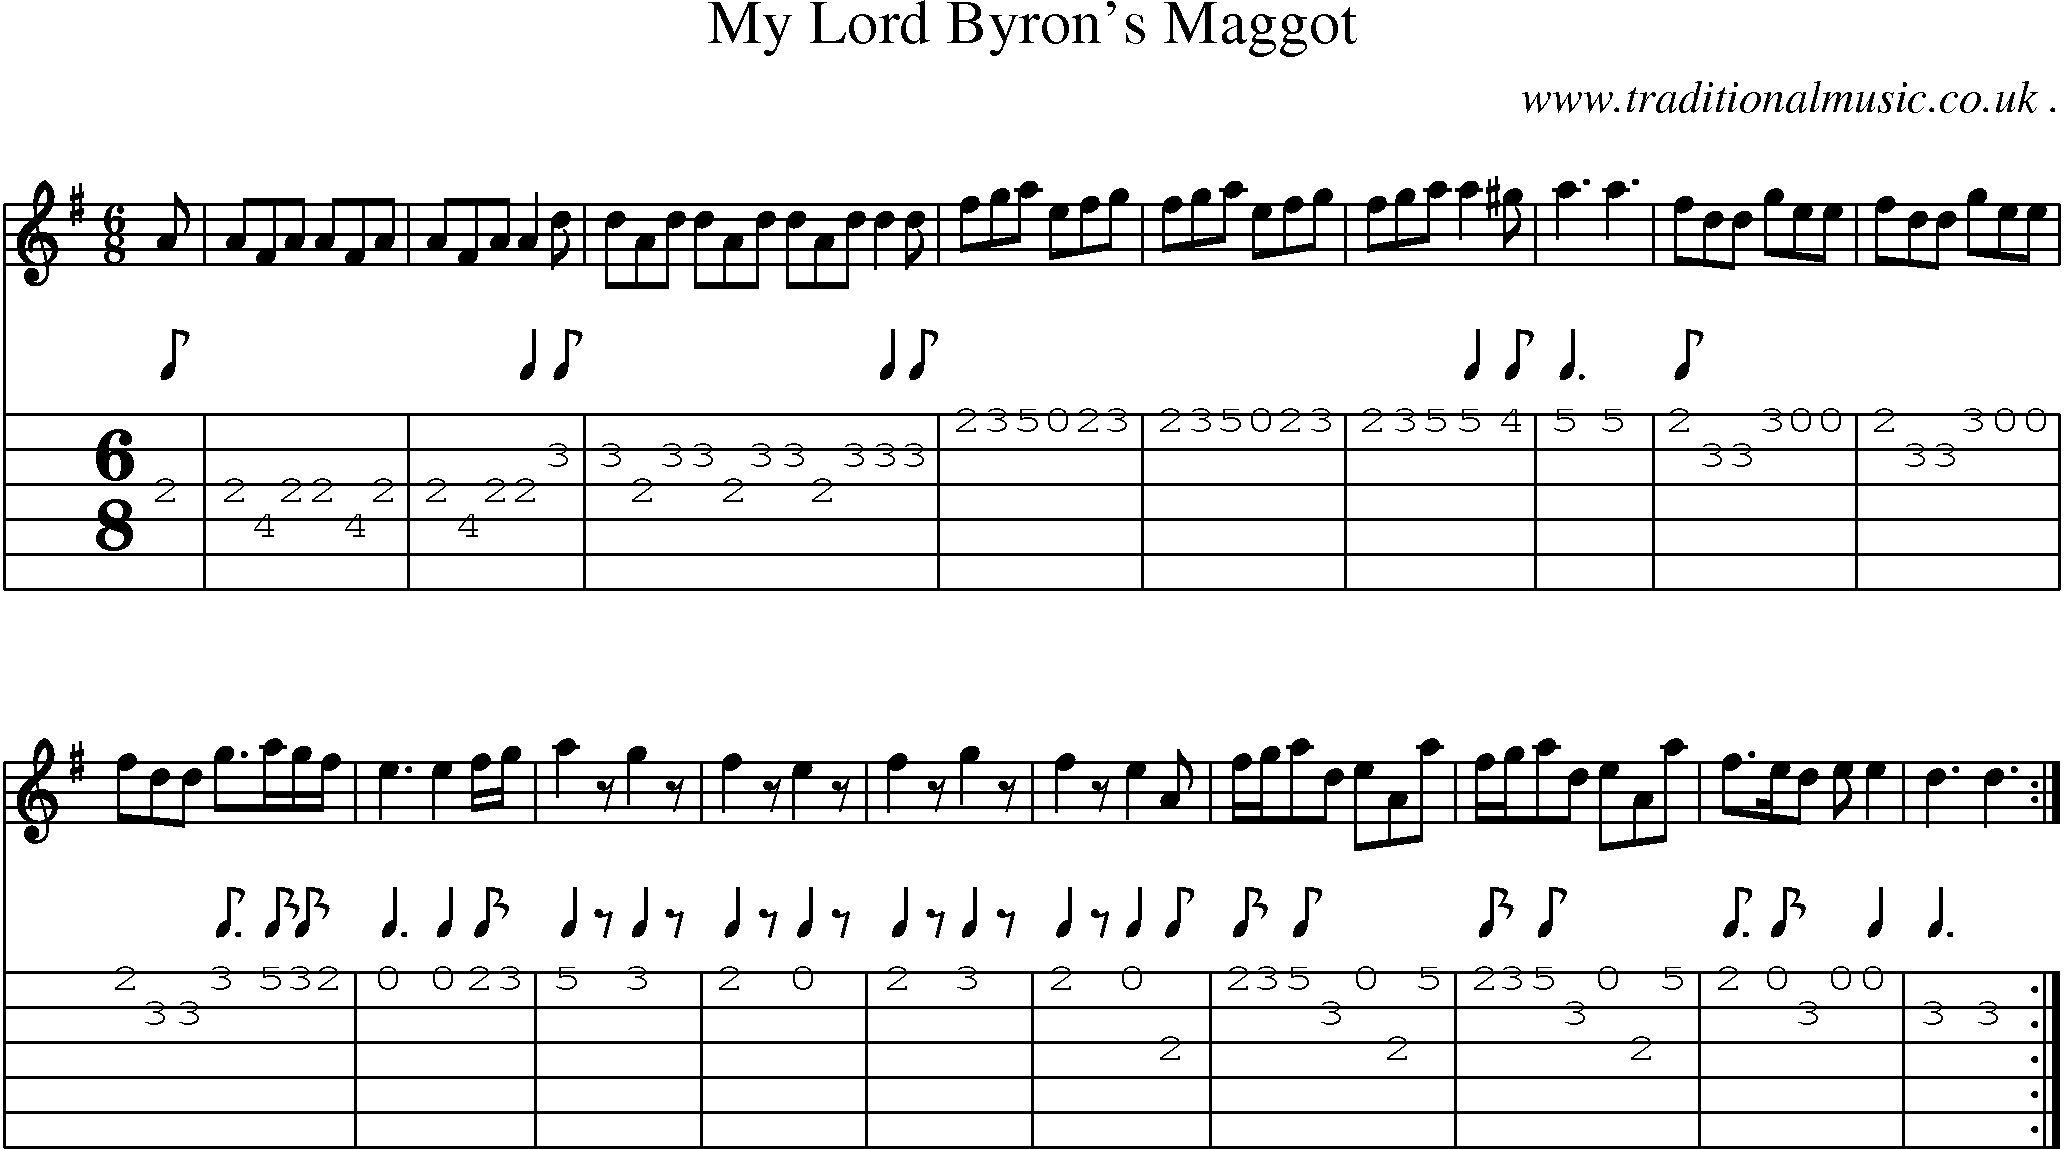 Sheet-Music and Guitar Tabs for My Lord Byrons Maggot